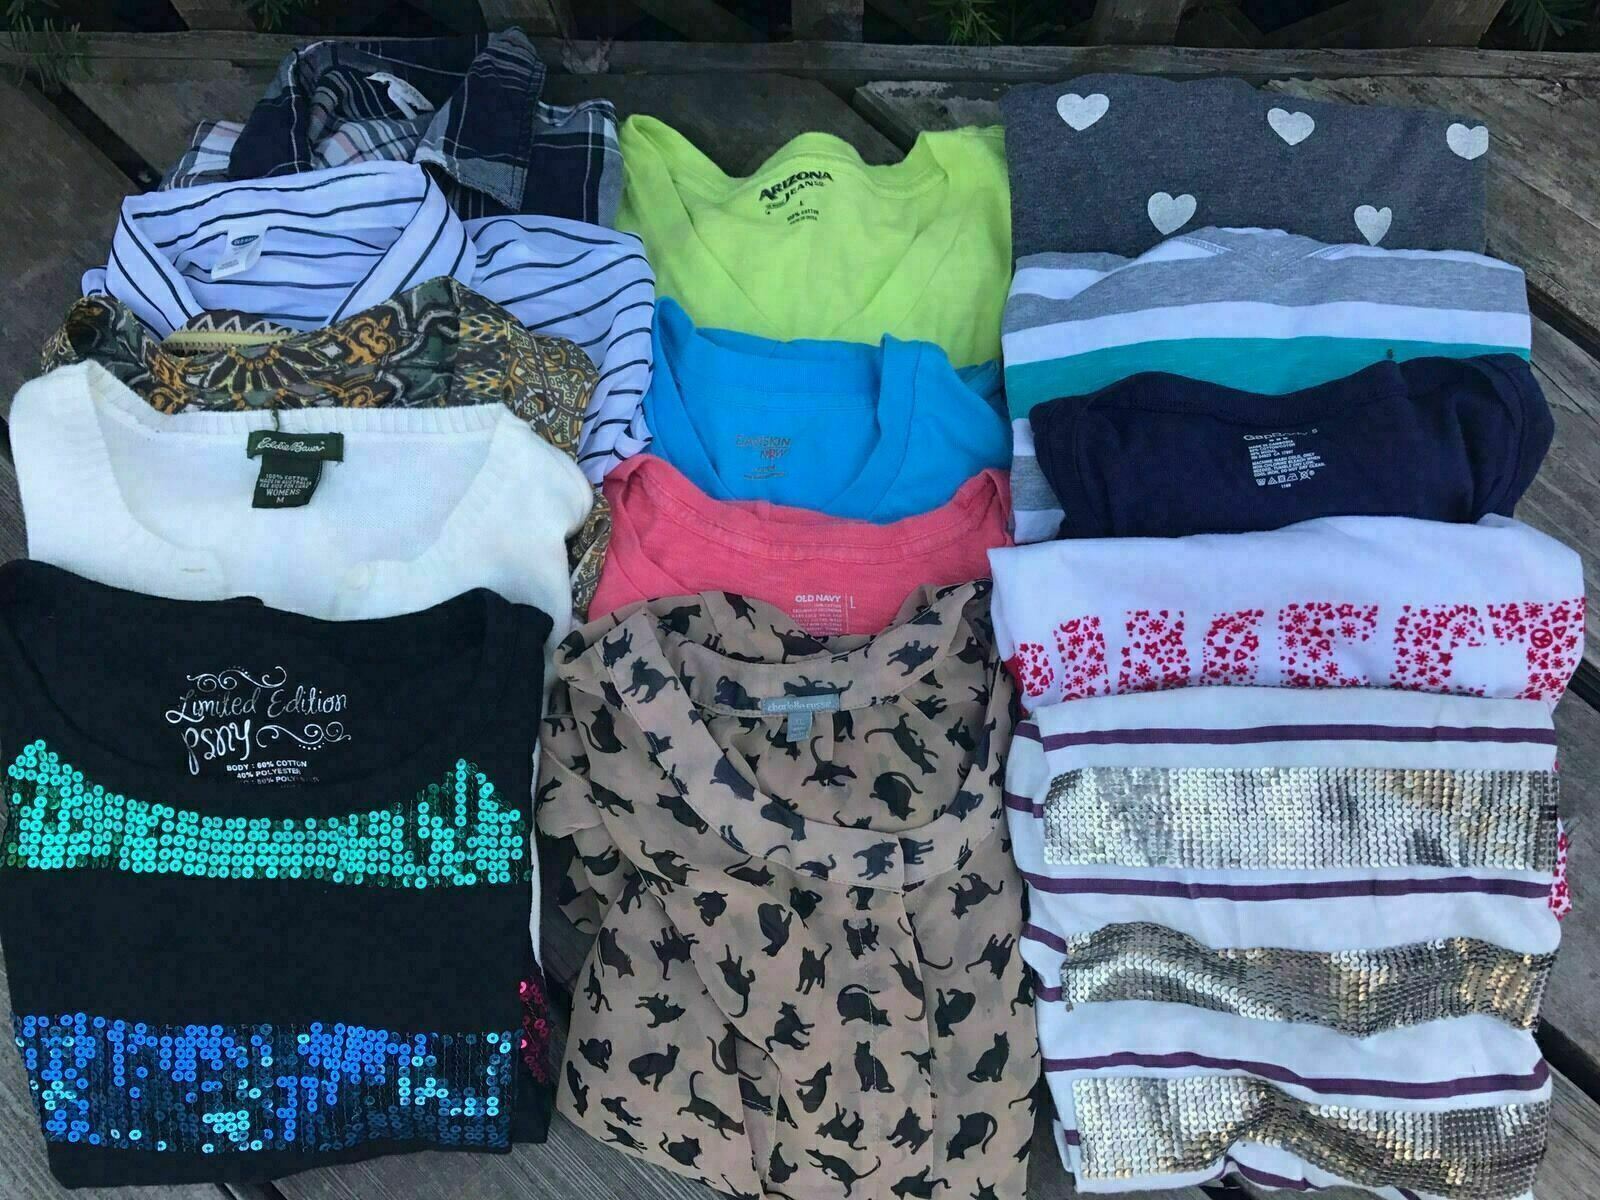 FIVE(5) pounds WOMEN's shirts WHOLESALE Lot SIZE XL/XXL Top Spring/Sum –  Retail in the Mail